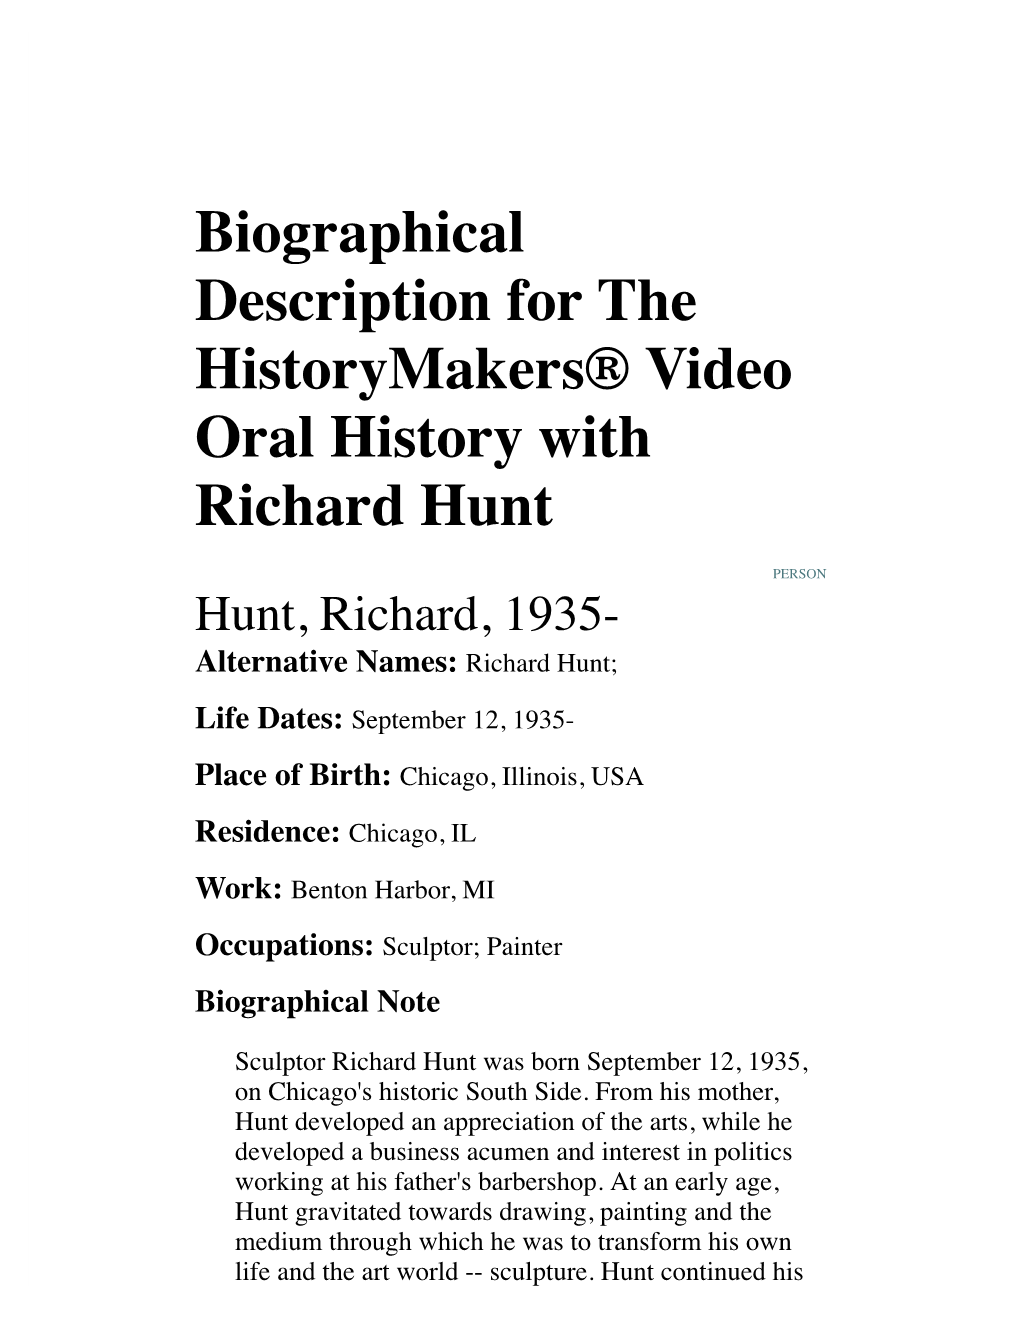 Biographical Description for the Historymakers® Video Oral History with Richard Hunt